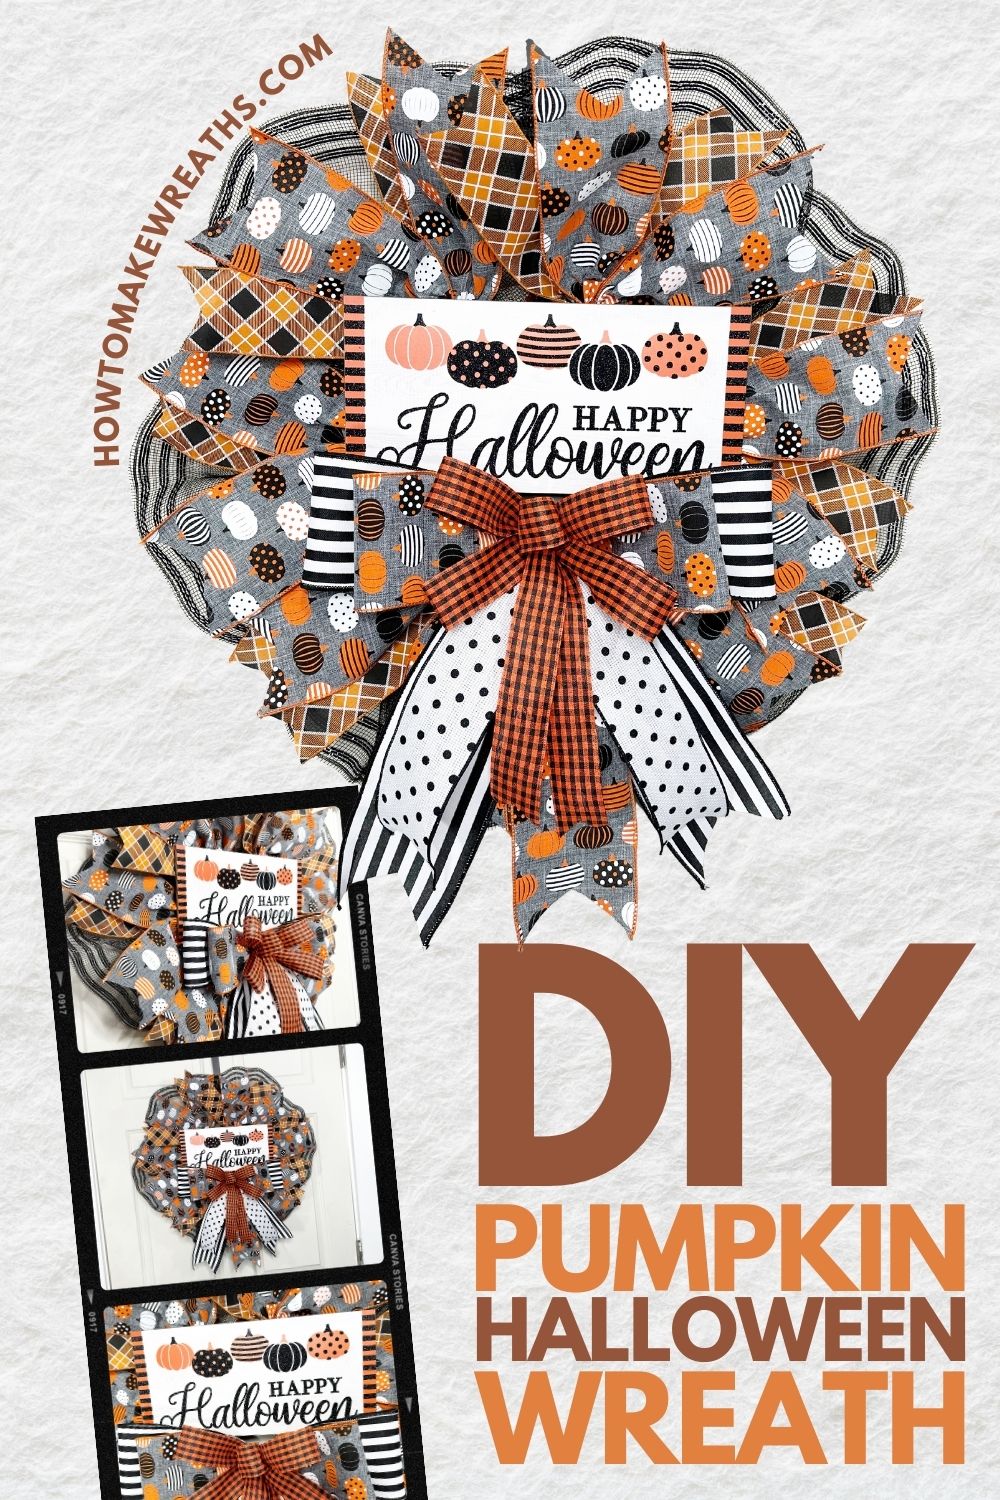 DIY Pumpkin Halloween Wreath with photo collage of different angles